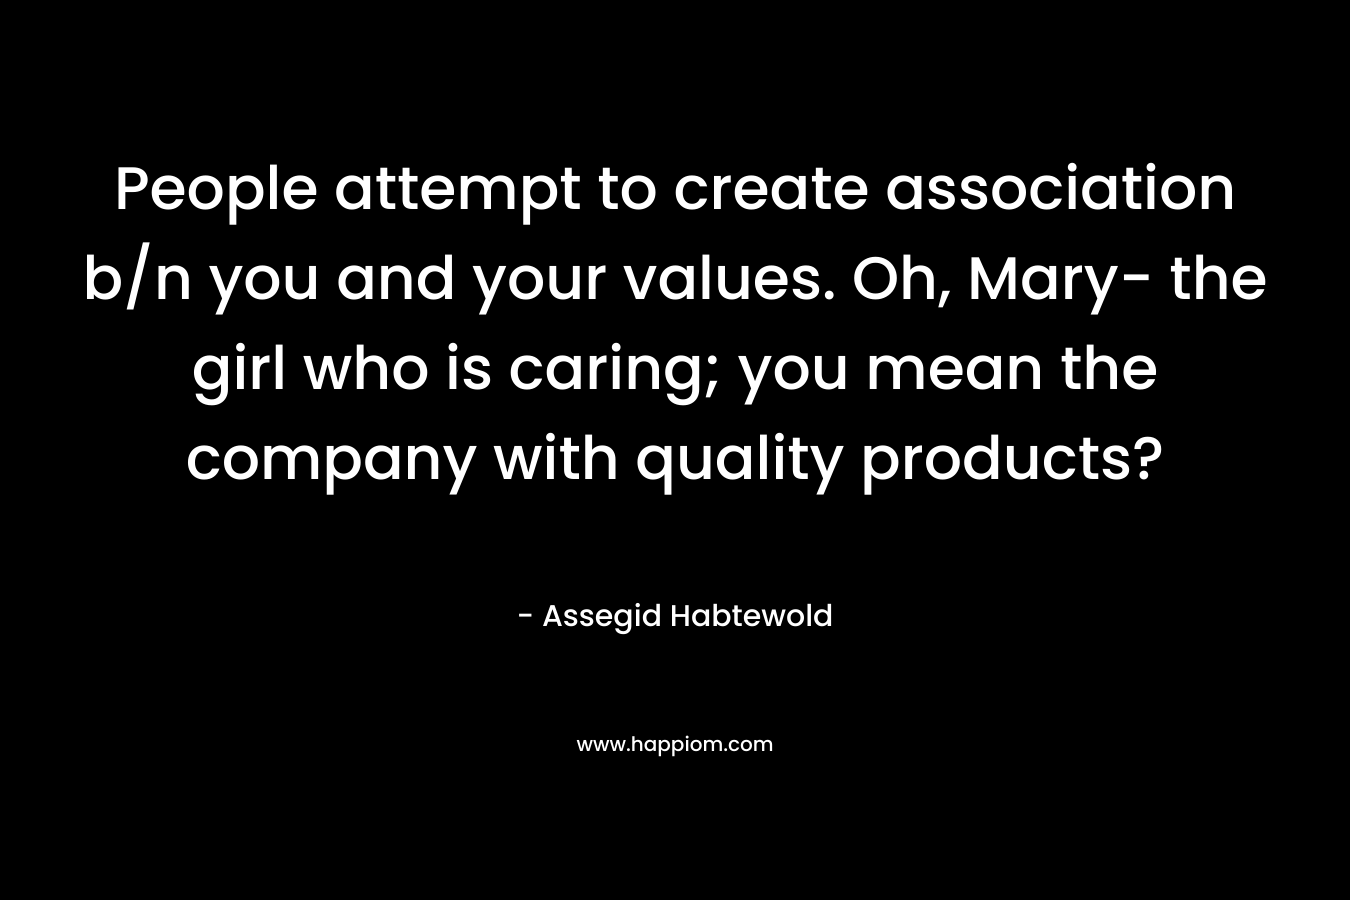 People attempt to create association b/n you and your values. Oh, Mary- the girl who is caring; you mean the company with quality products?